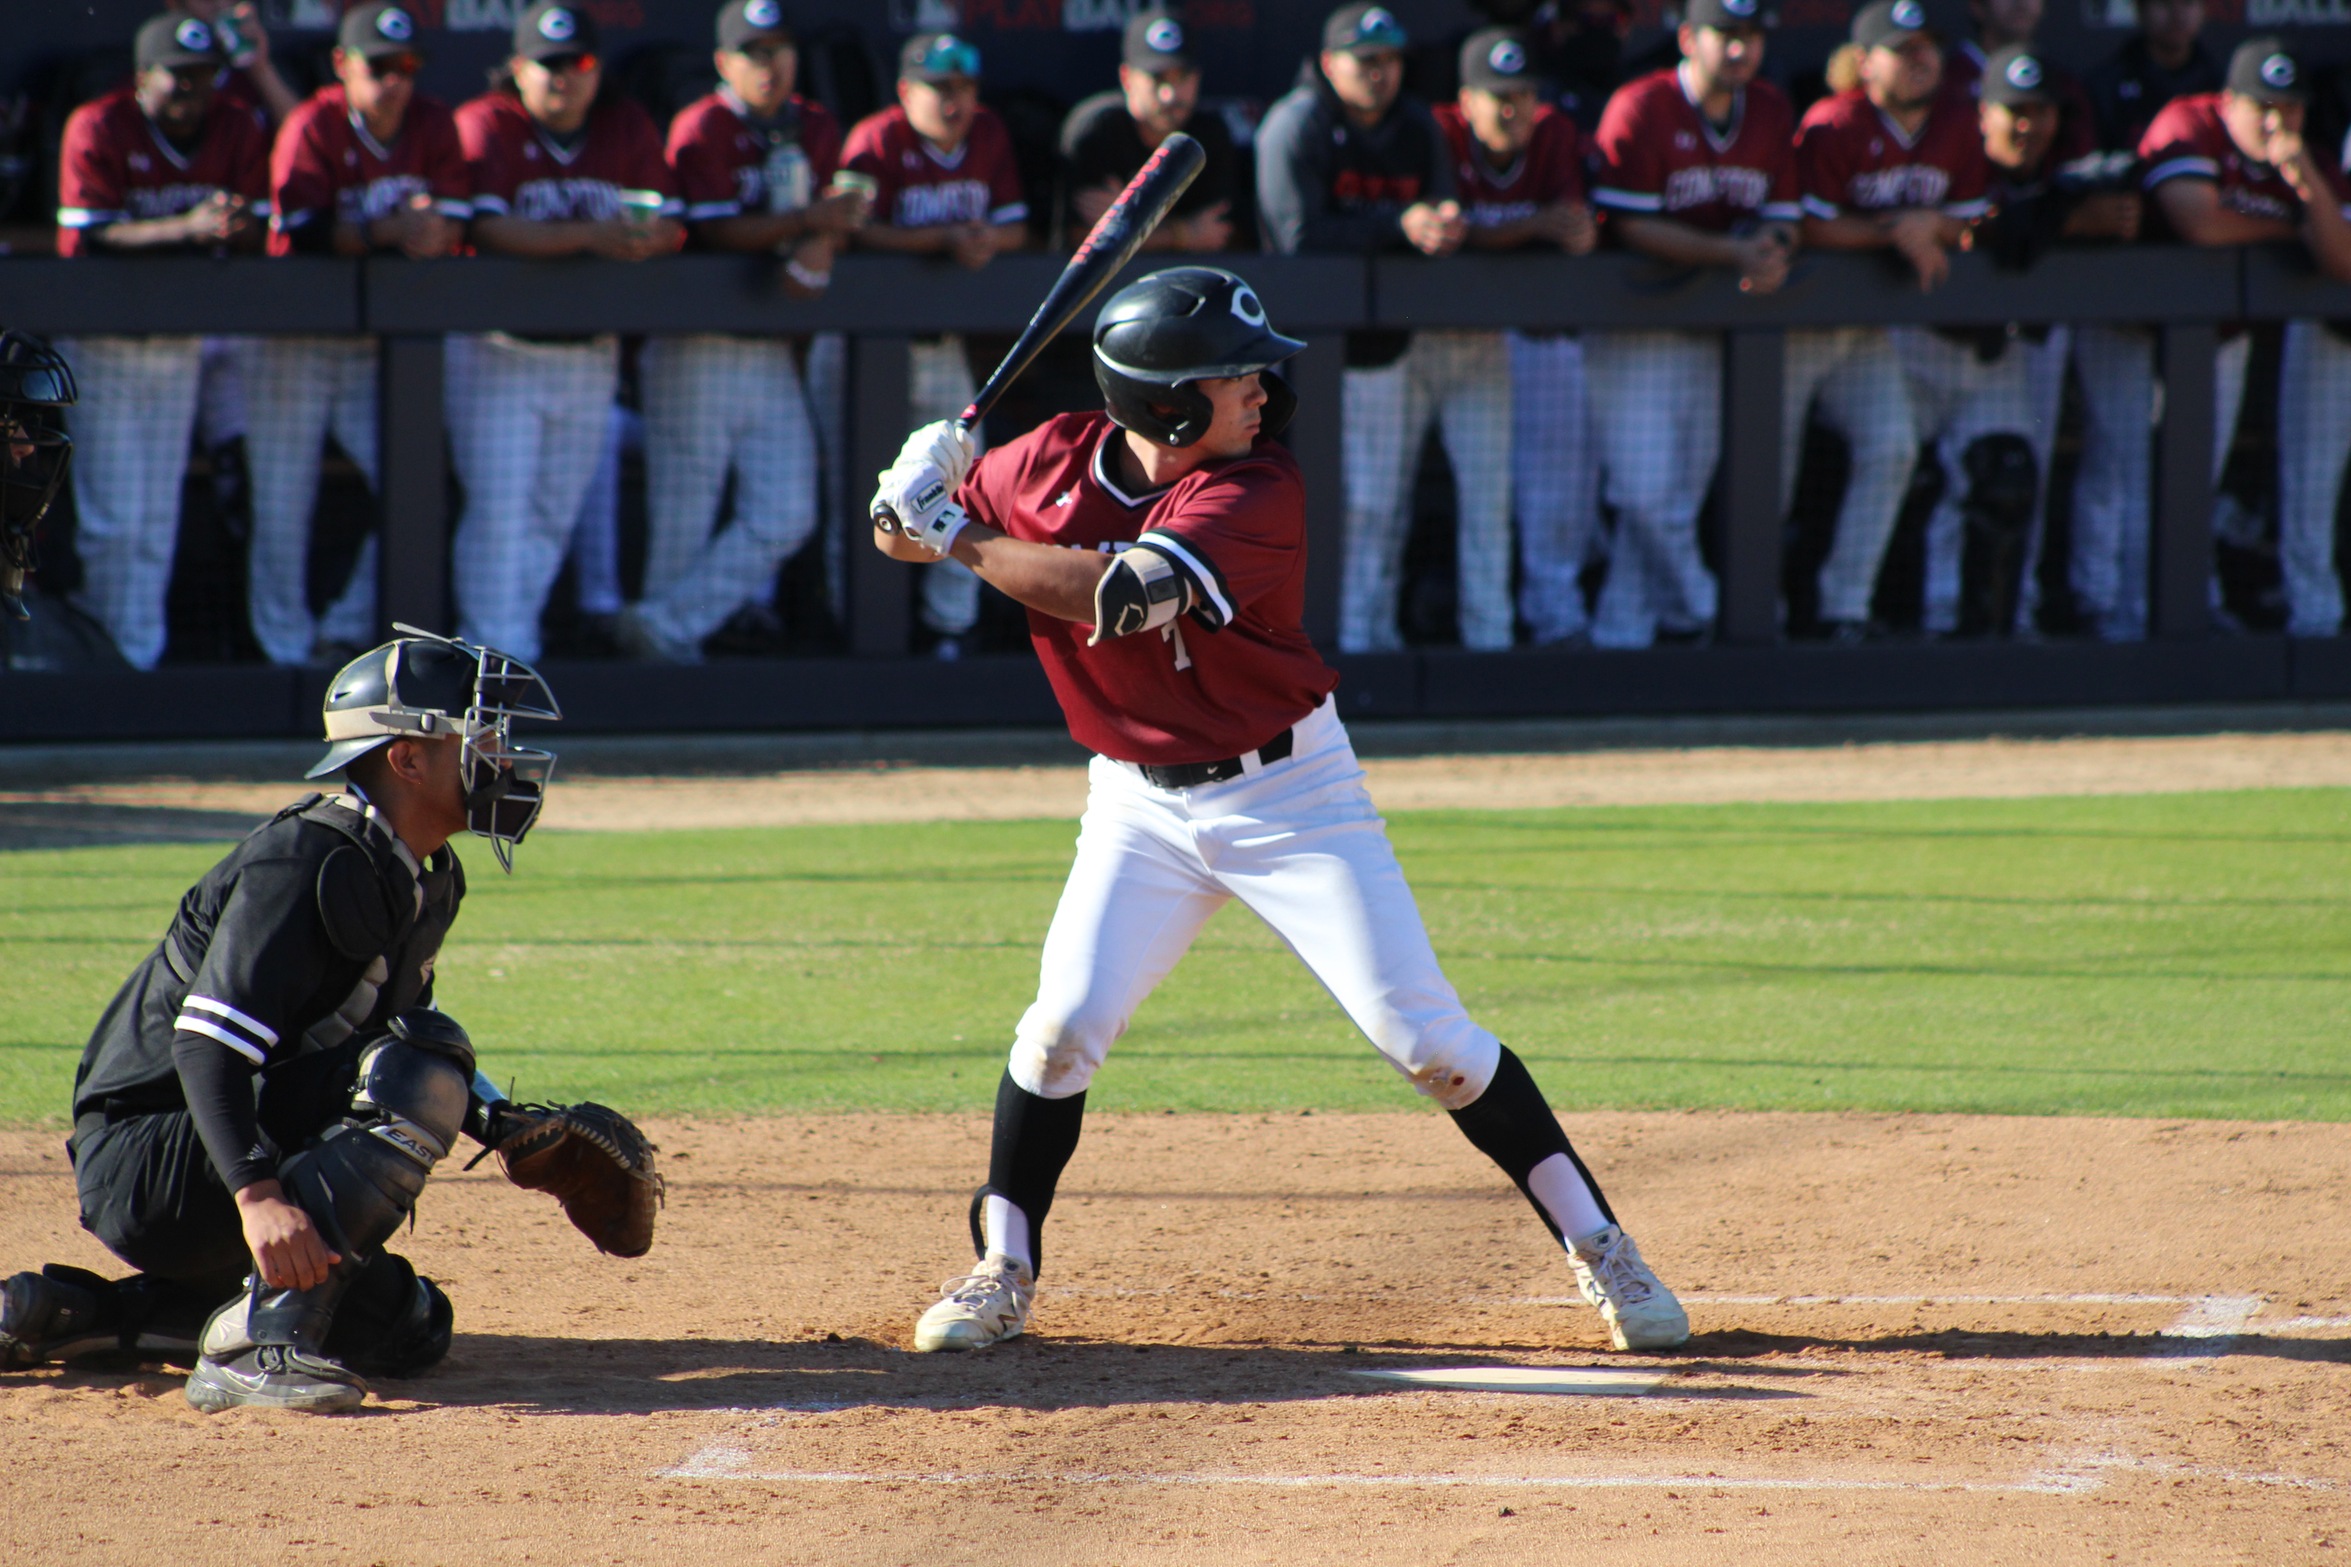 The Compton College Tartars baseball team lose 8-2 to the Irvine Valley College Lasers